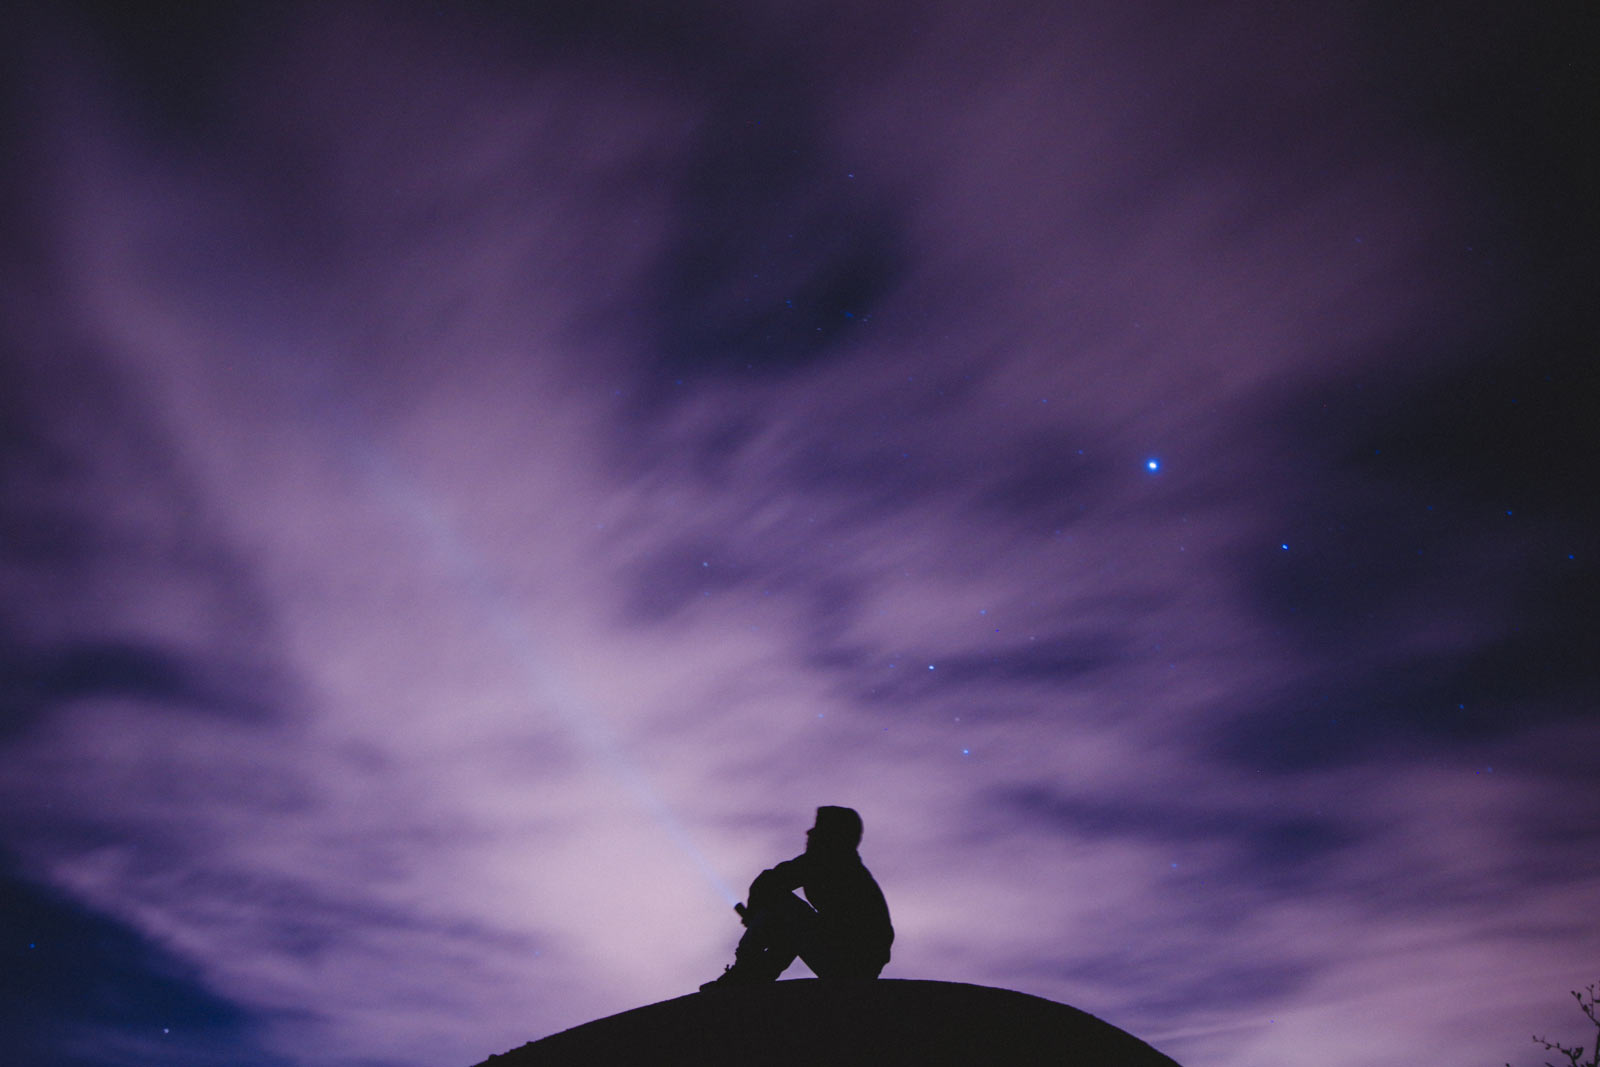 Silhouette of person in front of a cloudy night sky. One star in particular shines very brightly above.